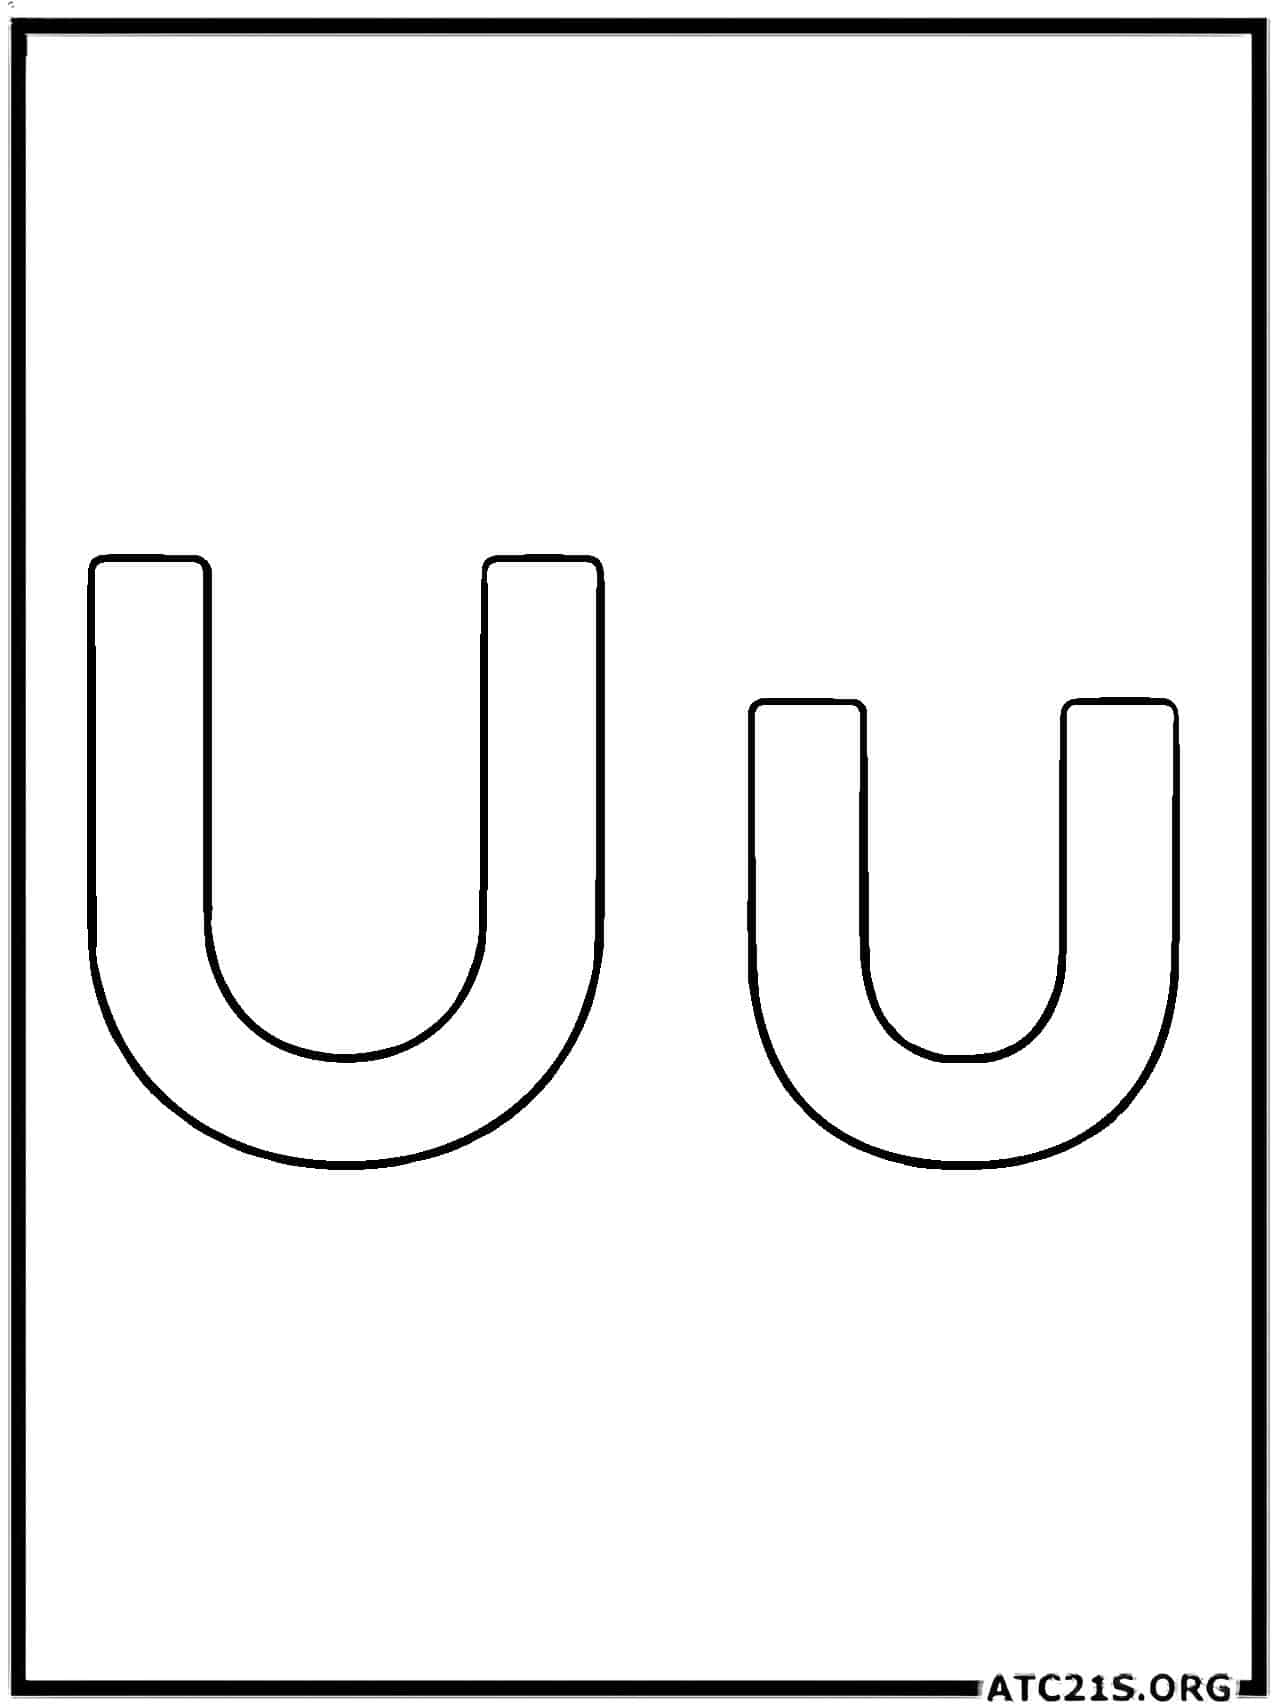 letter_u_coloring_page